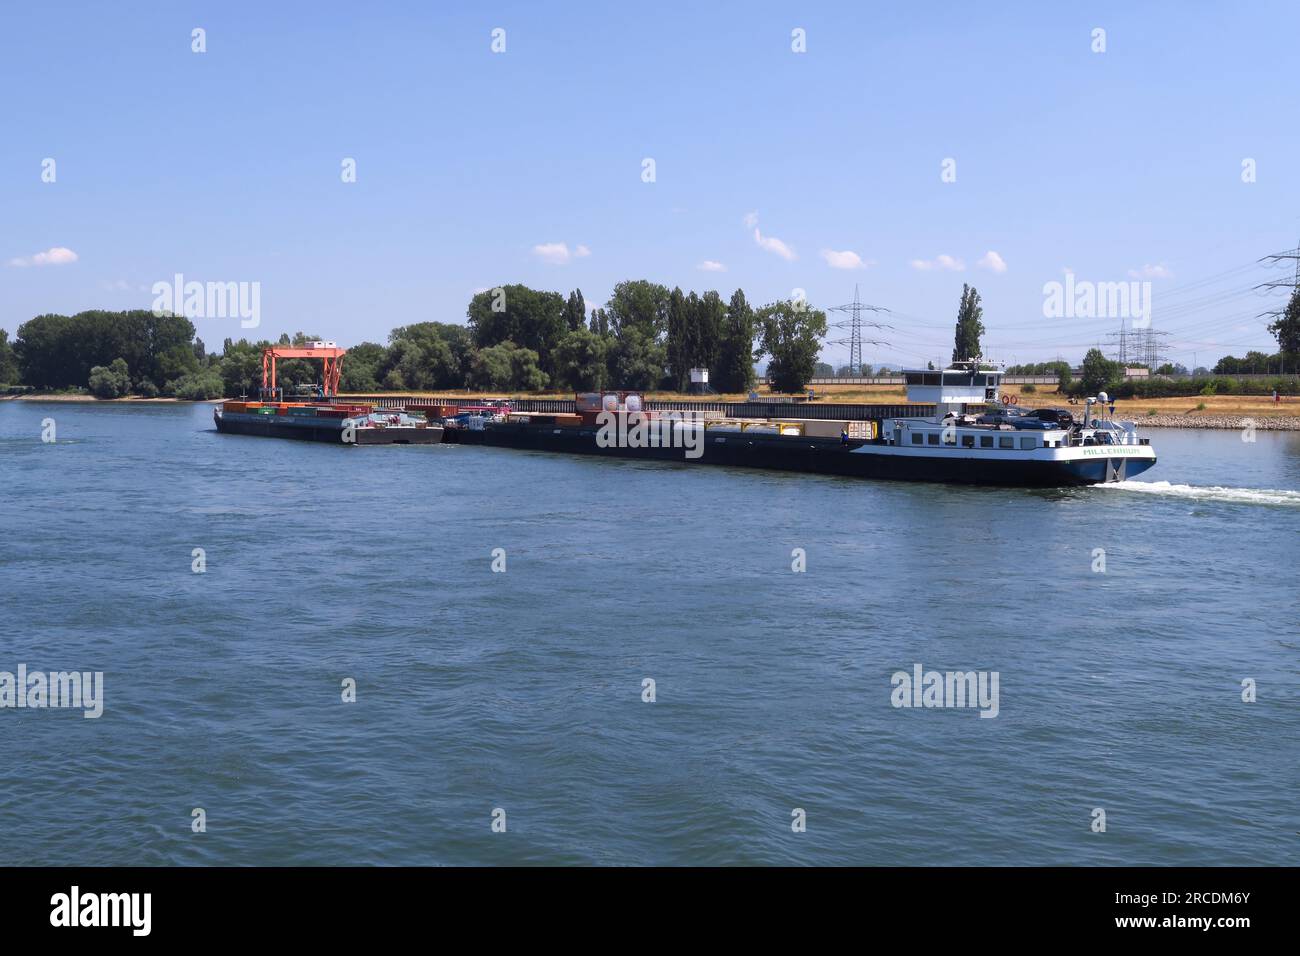 MV Millennium, a container barge makes its way up the River Rhine near Bildis, Germany Stock Photo